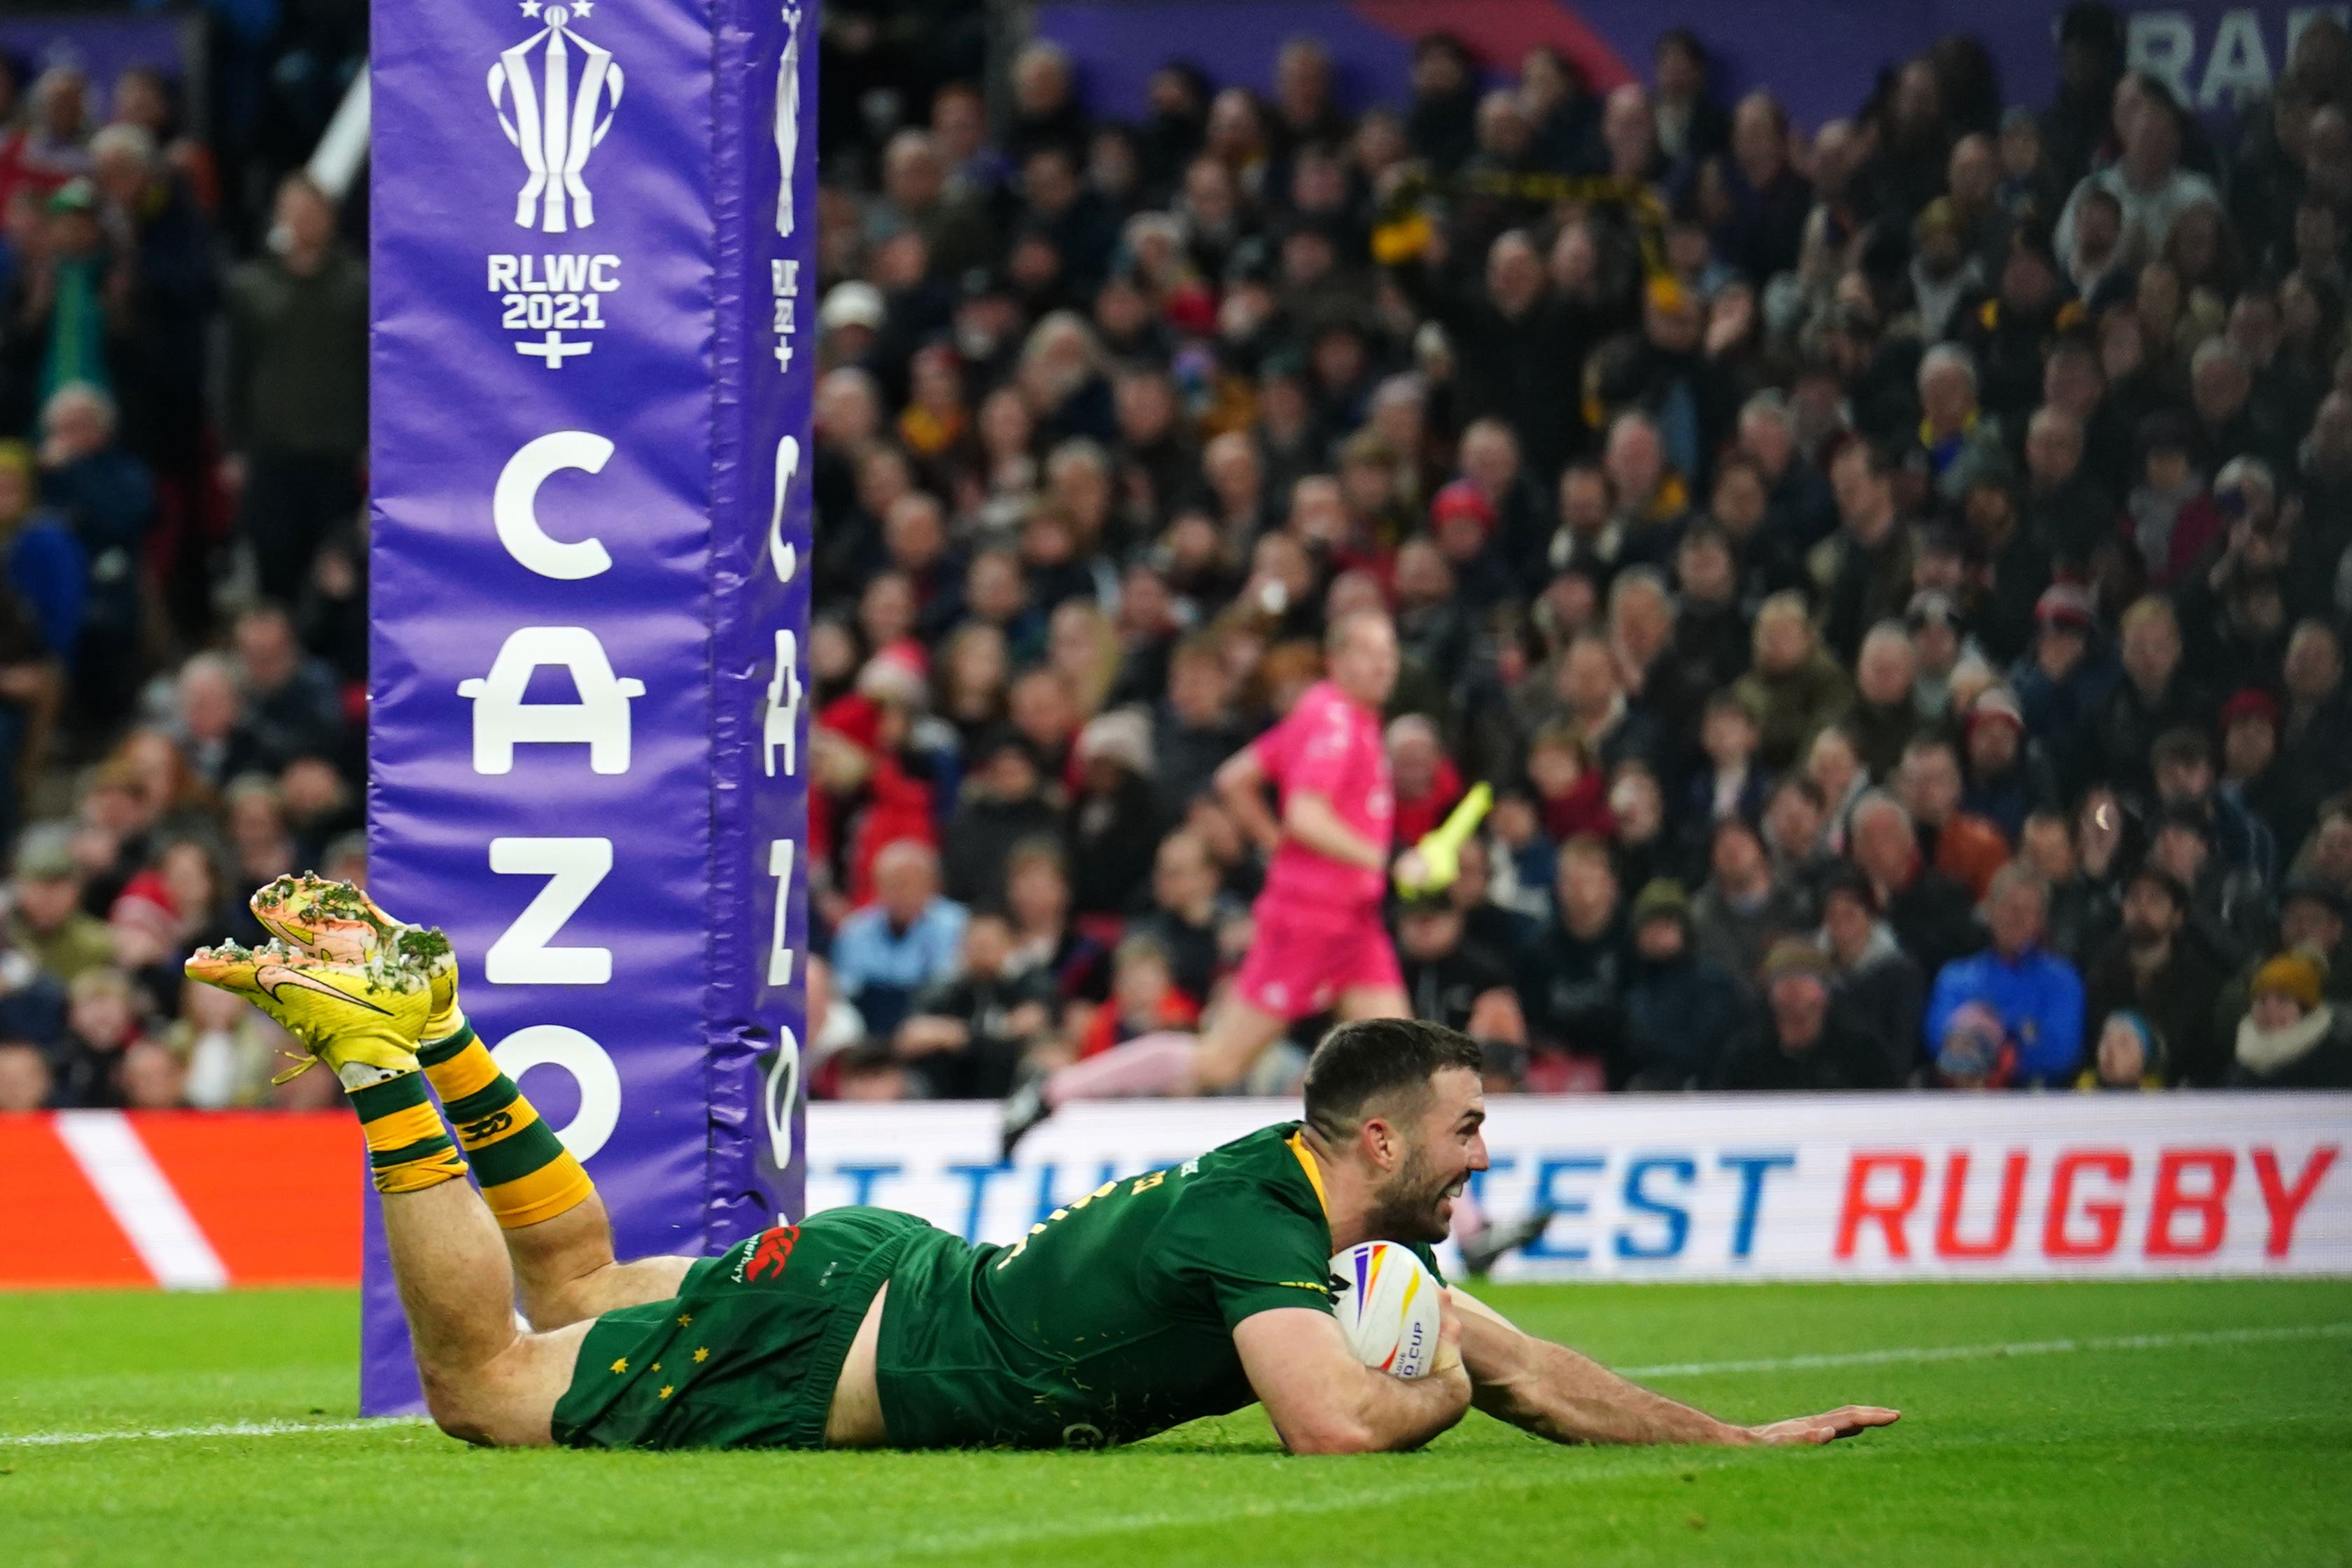 Tedesco scored two of Australia’s tries as they triumphed in Manchester